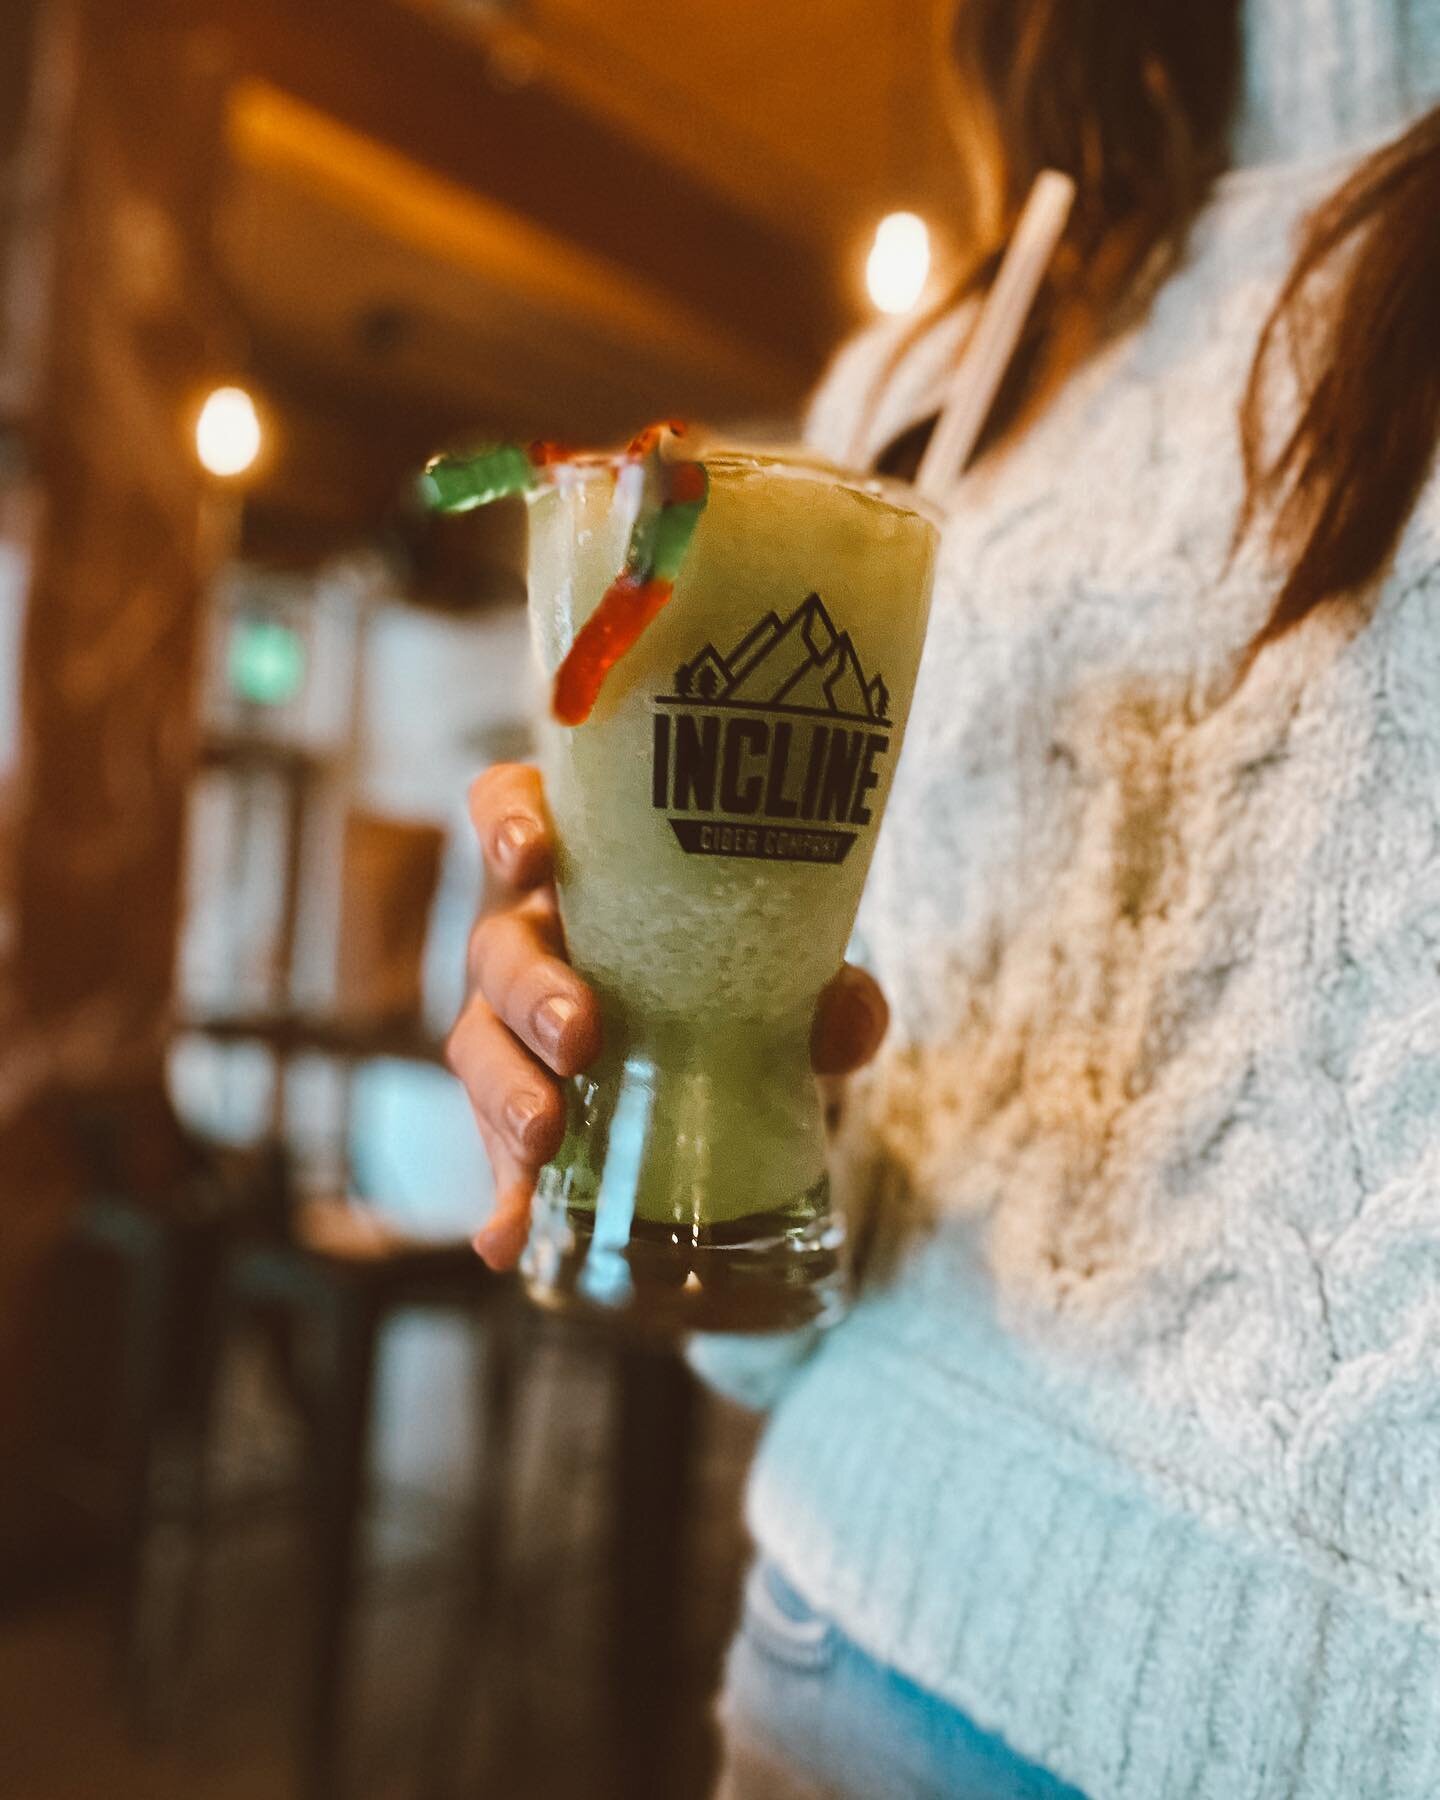 💀🍏POISON APPLE🍏💀

The cider slushie you need this weekend! #inclinecider #inclinecidercompany #ciderslushie